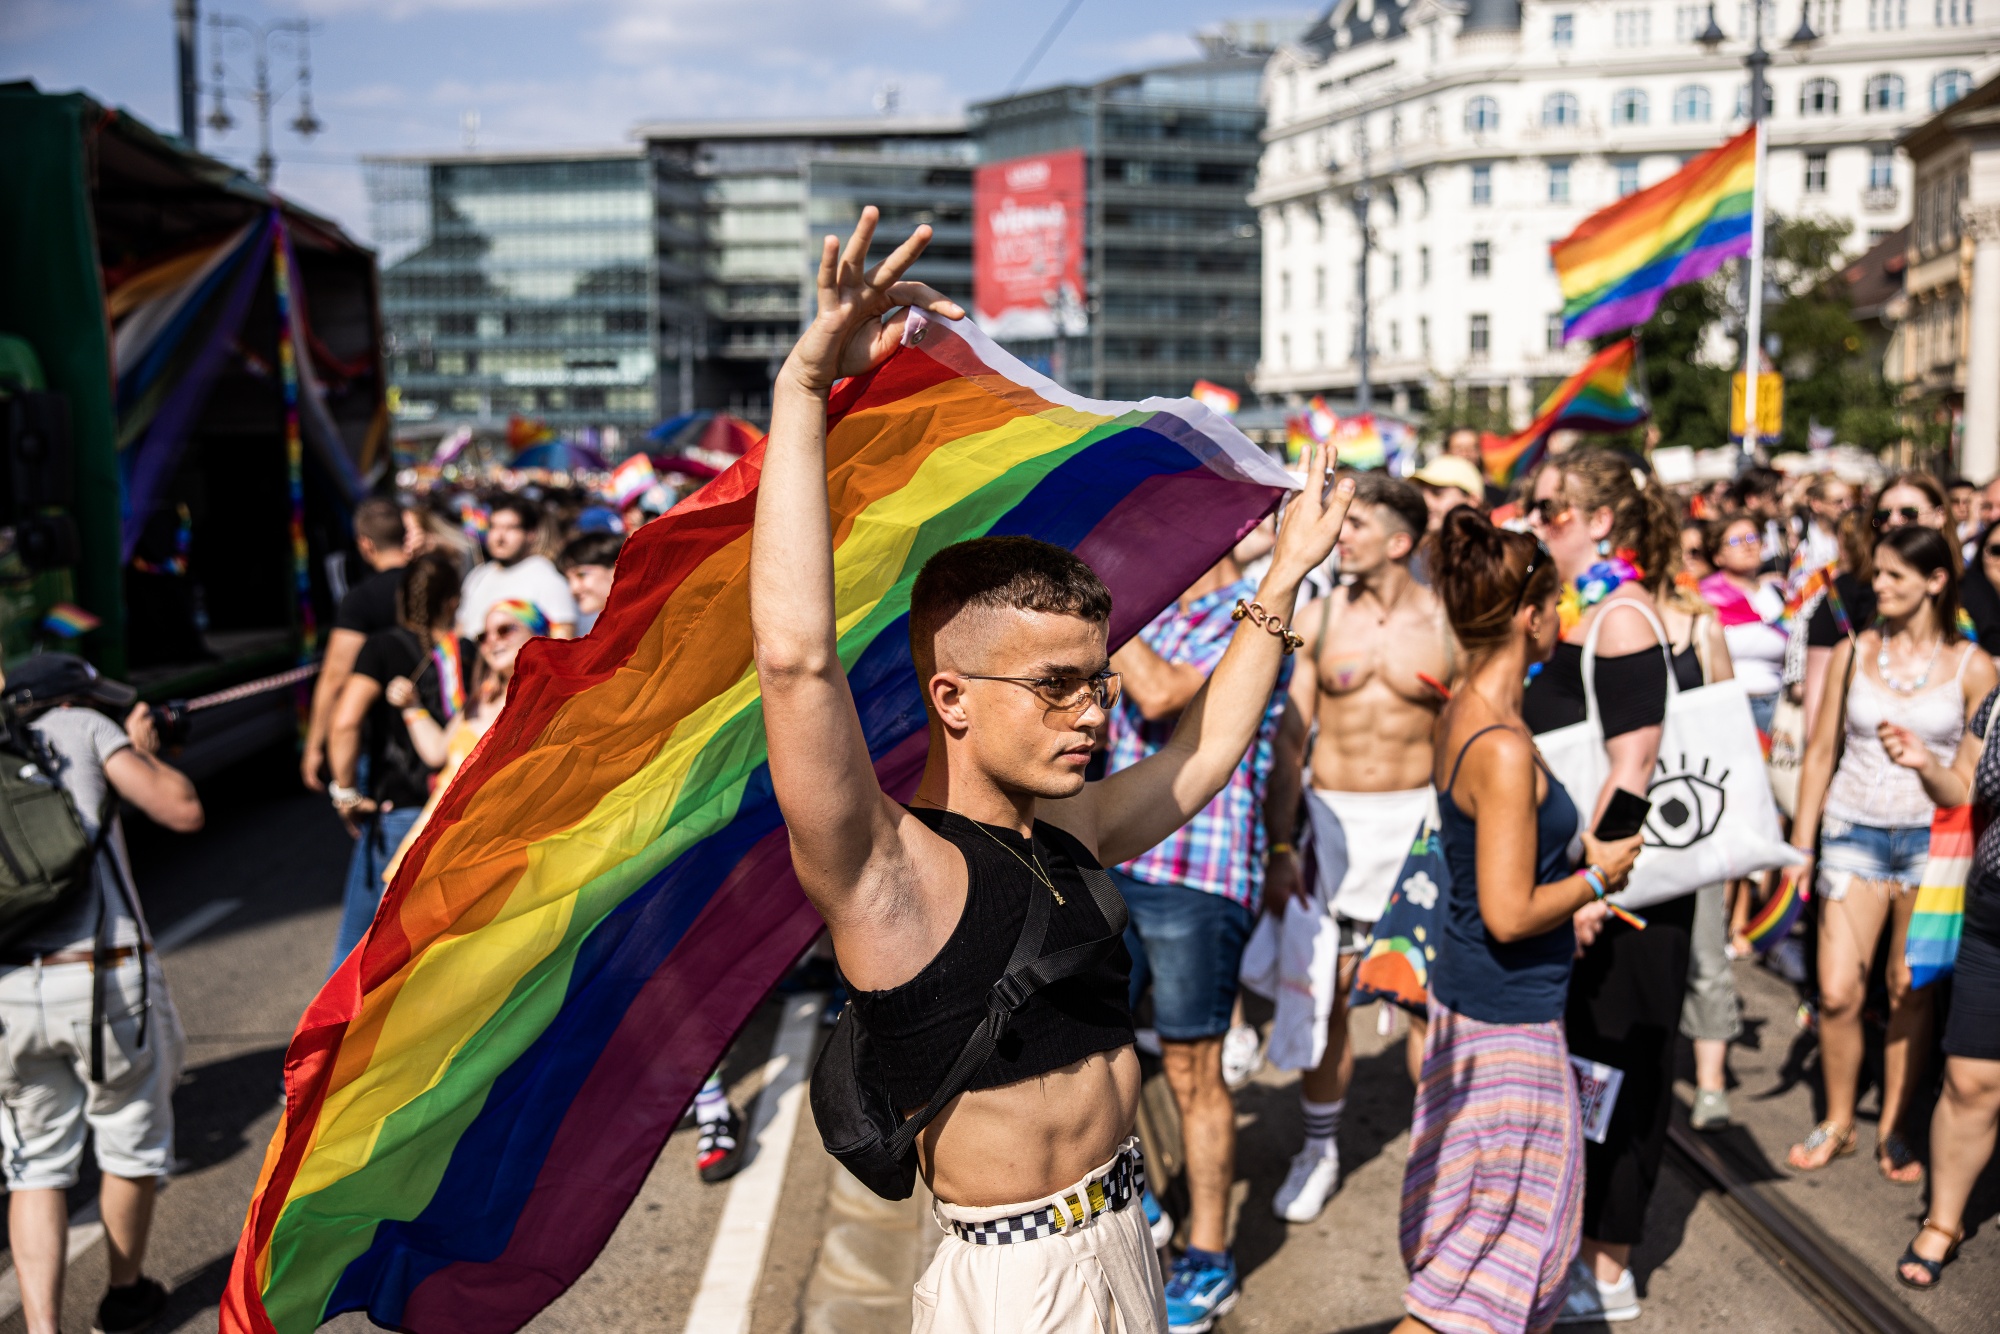 Hungary LGBTQ Protests: Inside Orban's Standoff With the EU - Bloomberg